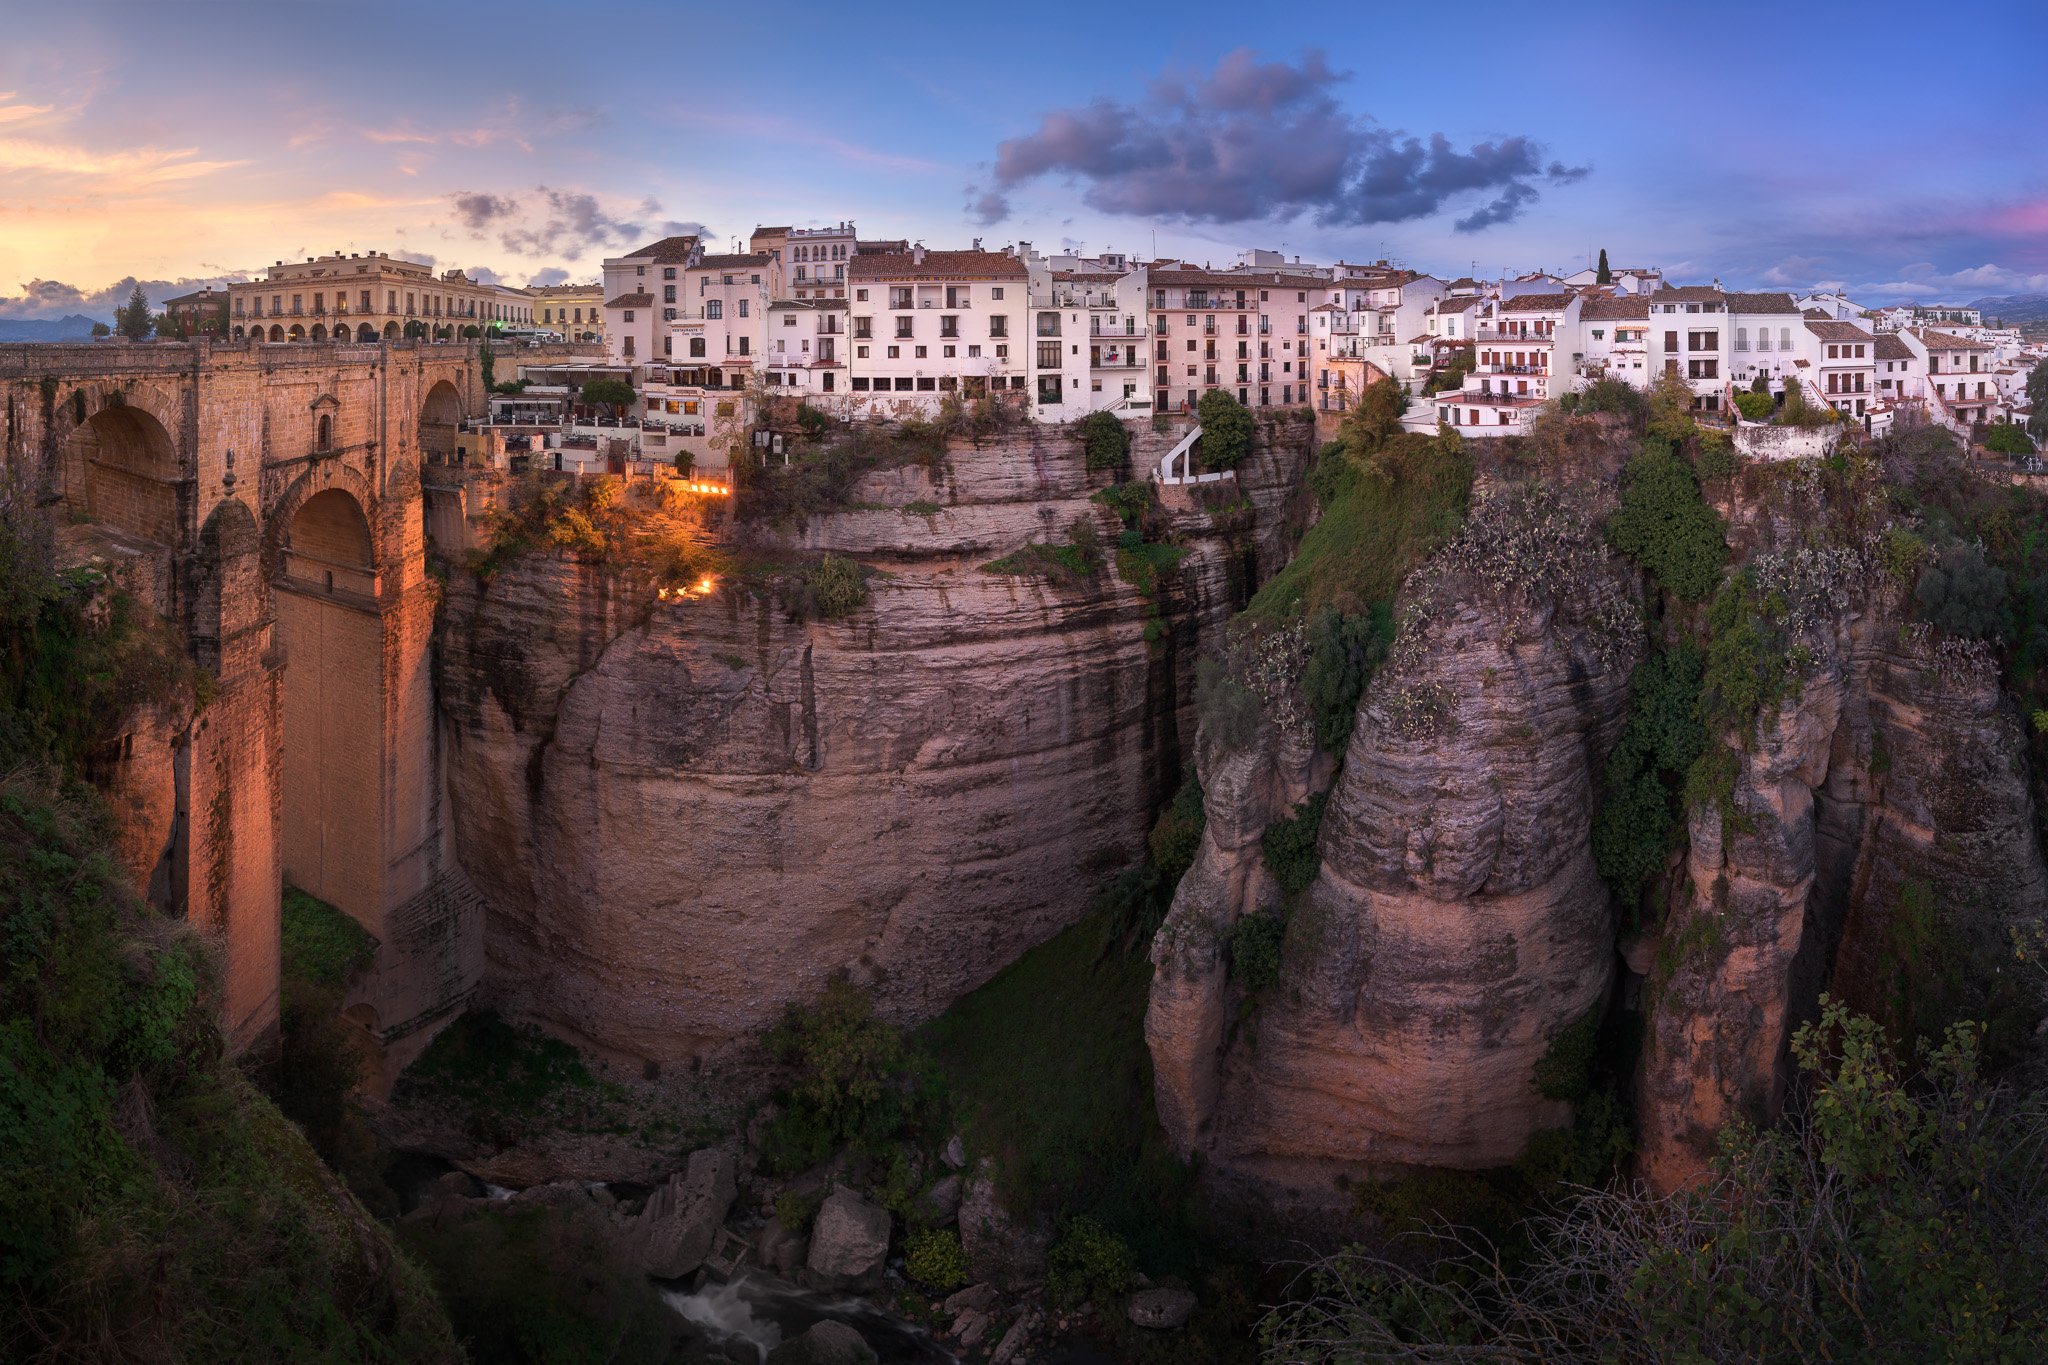 ancient, andalucia, andalusia, antique, arch, architecture, blue, bridge, building, canyon, chasm, city, cityscape, cliff, dusk, europe, european, evening, gorge, high, hill, historic, historical, history, house, iberia, iconic, illuminated, landmark, lan, Andrey Omelyanchuk